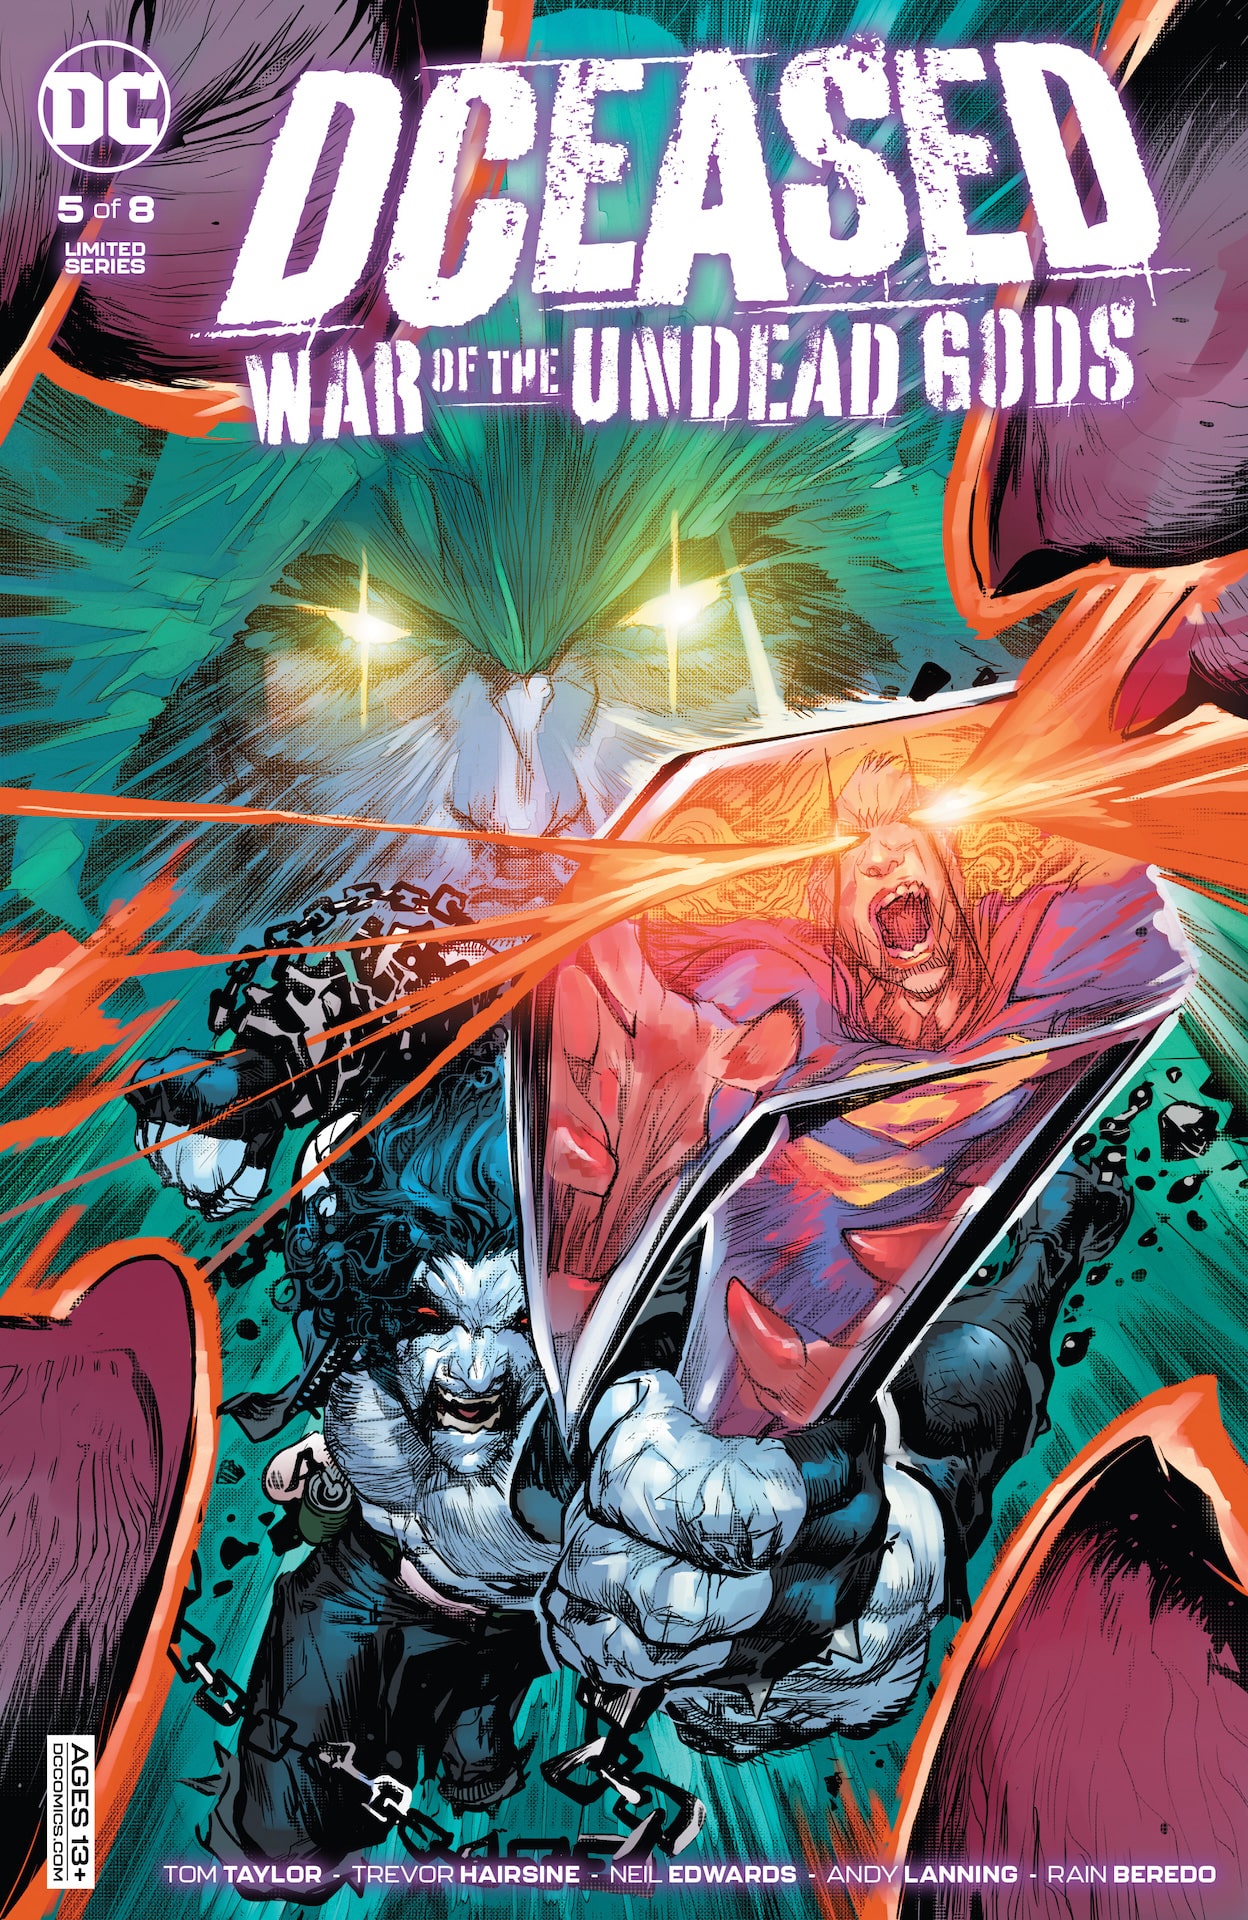 DC Preview: DCeased: War of the Undead Gods #5